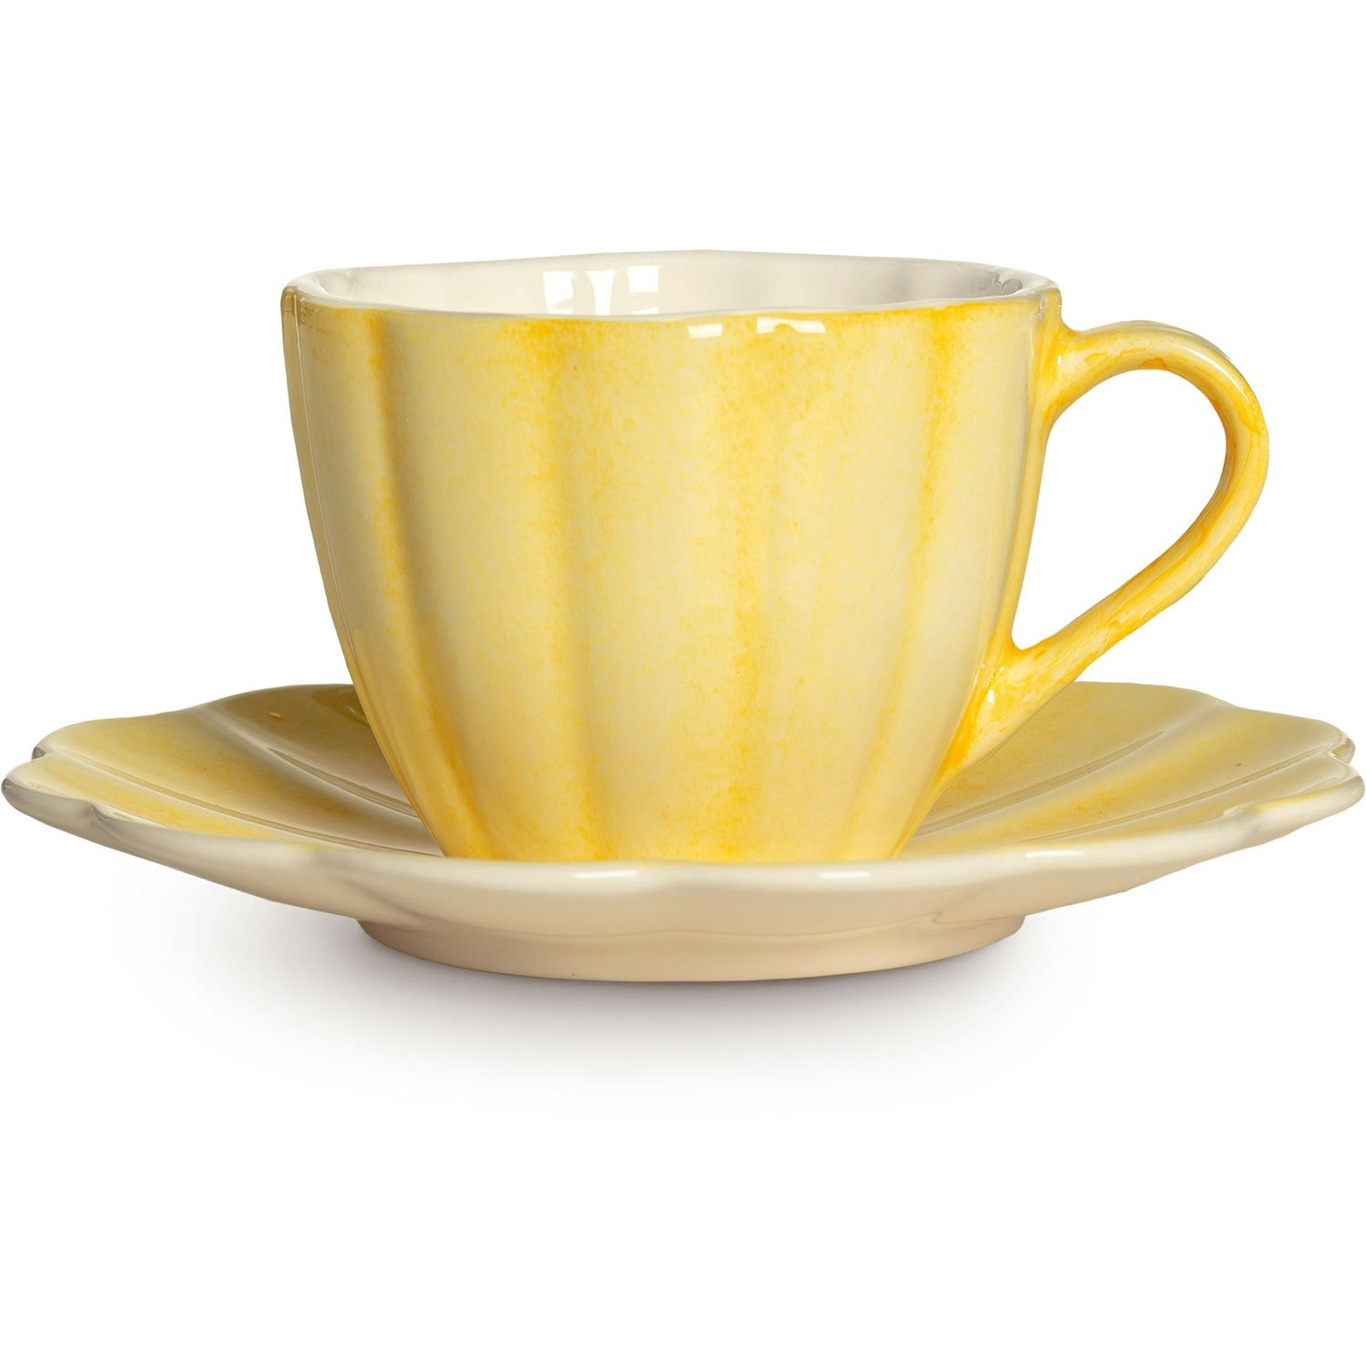 https://royaldesign.com/image/2/mateus-oyster-cup-with-saucer-25cl-0?w=800&quality=80